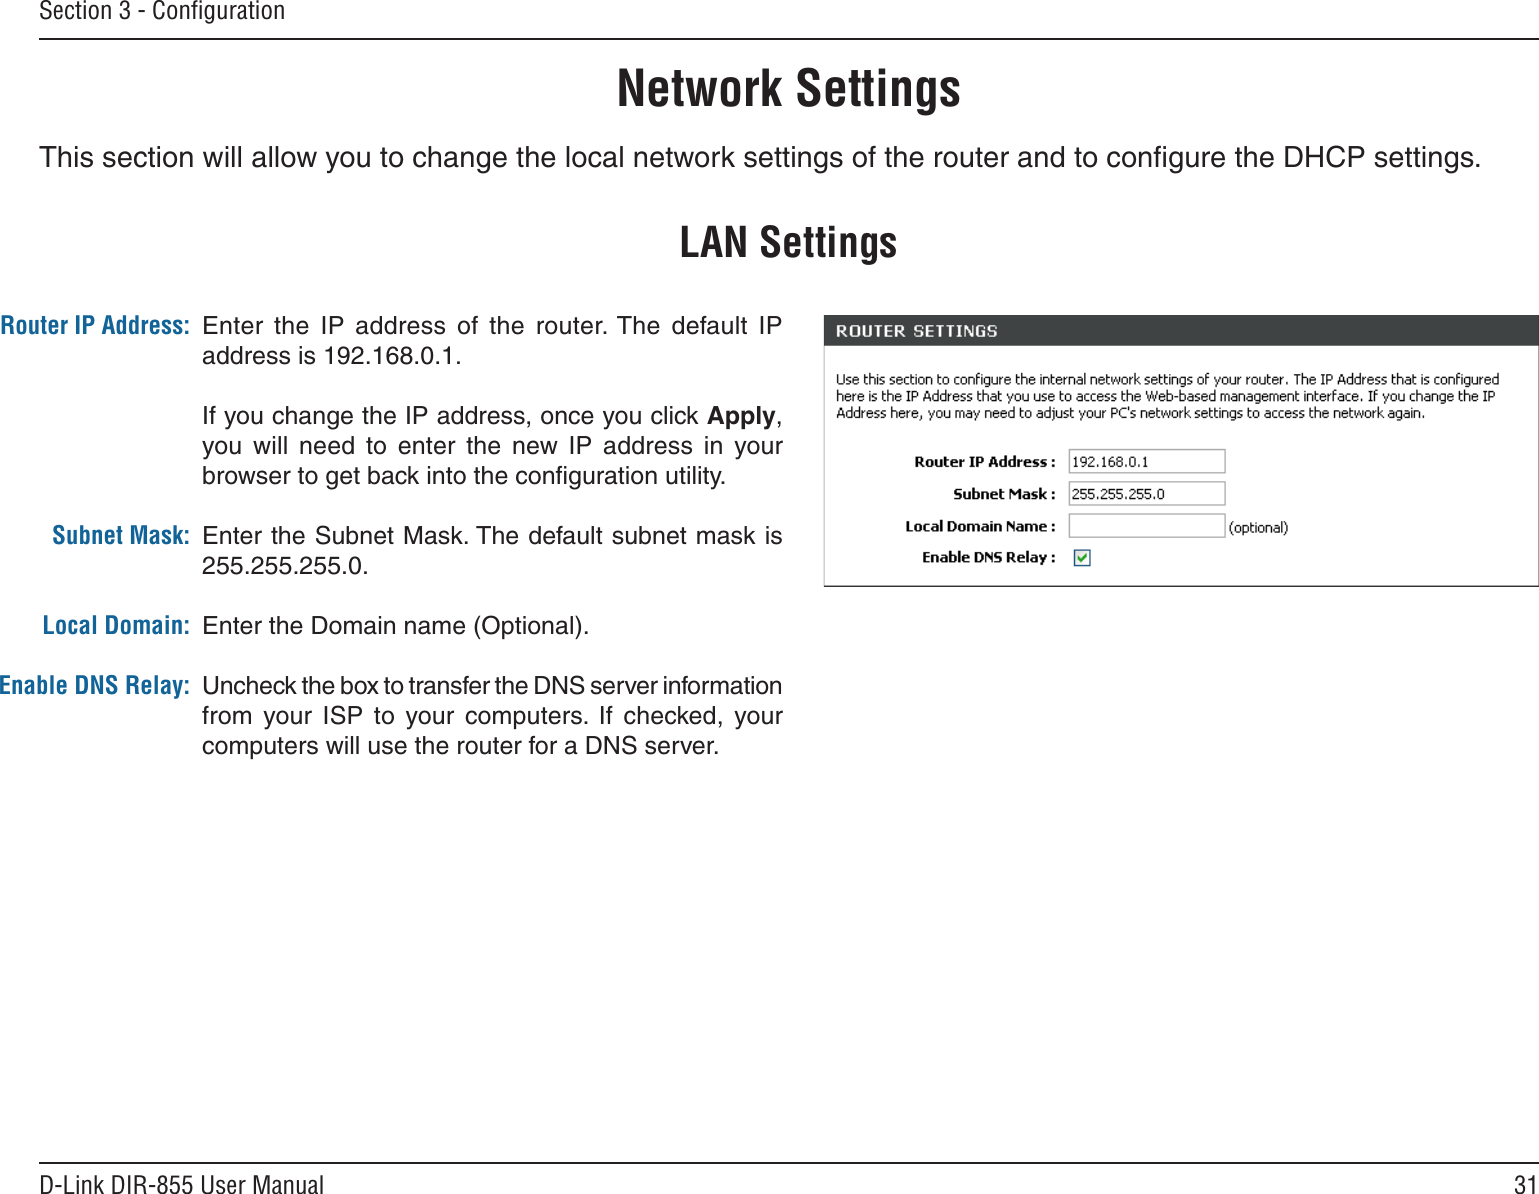 31D-Link DIR-855 User ManualSection 3 - ConﬁgurationThis section will allow you to change the local network settings of the router and to conﬁgure the DHCP settings.Network SettingsEnter  the  IP  address  of  the  router. The  default IP address is 192.168.0.1.If you change the IP address, once you click Apply, you will  need  to  enter  the  new  IP  address  in  your browser to get back into the conﬁguration utility.Enter the Subnet Mask. The default subnet mask is 255.255.255.0.Enter the Domain name (Optional).Uncheck the box to transfer the DNS server information from  your  ISP  to  your  computers.  If  checked,  your computers will use the router for a DNS server.Router IP Address:Subnet Mask:Local Domain:Enable DNS Relay:LAN Settings